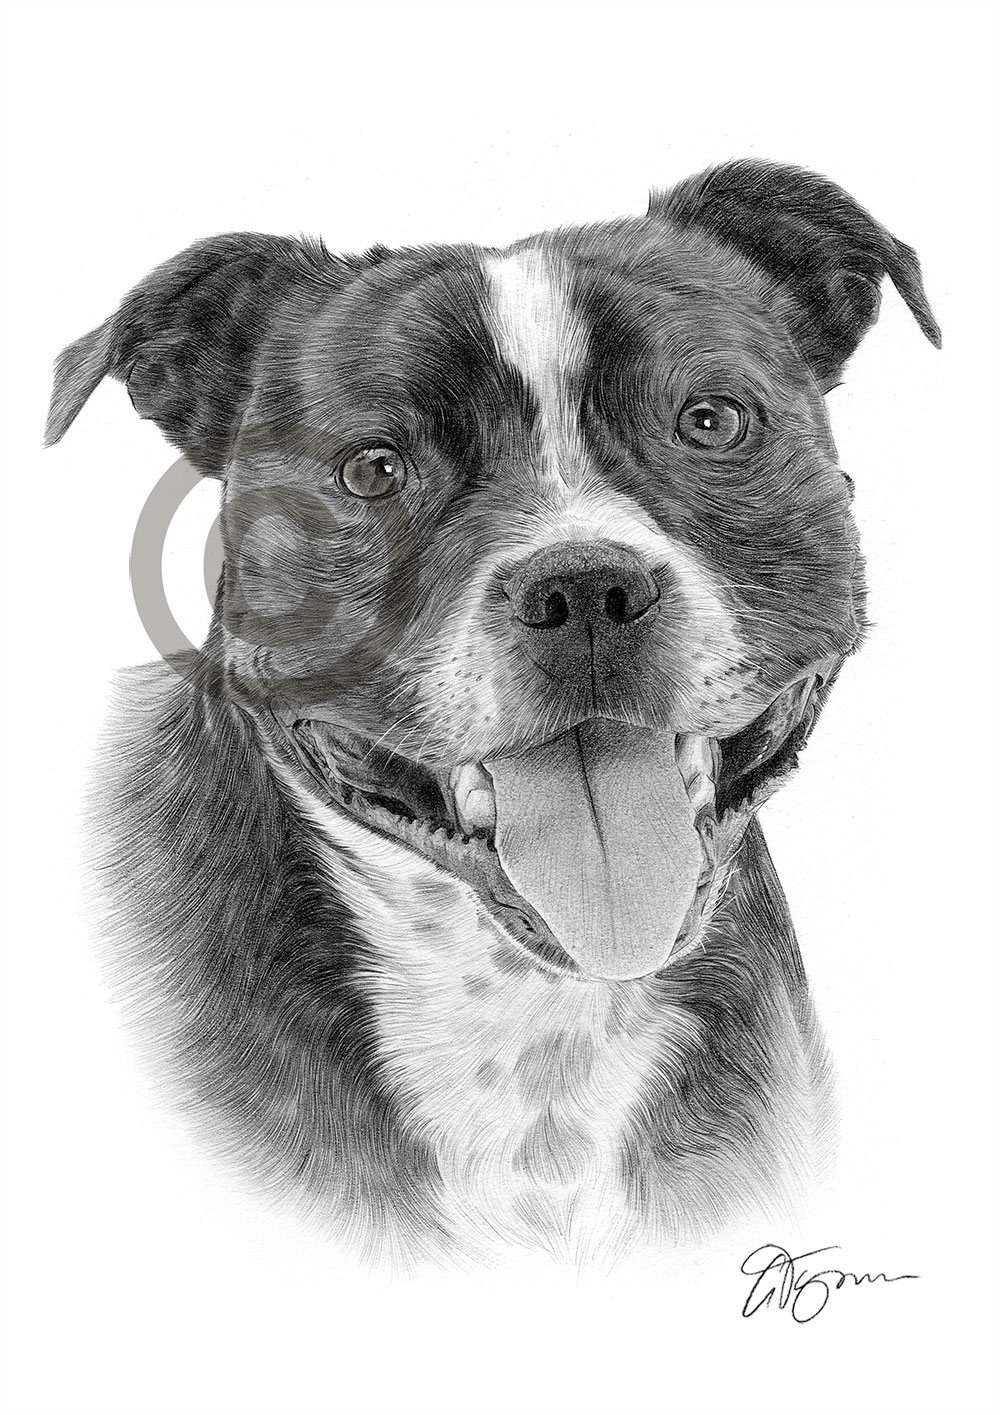 Pencil drawing of an adult staffordshire bull terrier by artist Gary Tymon